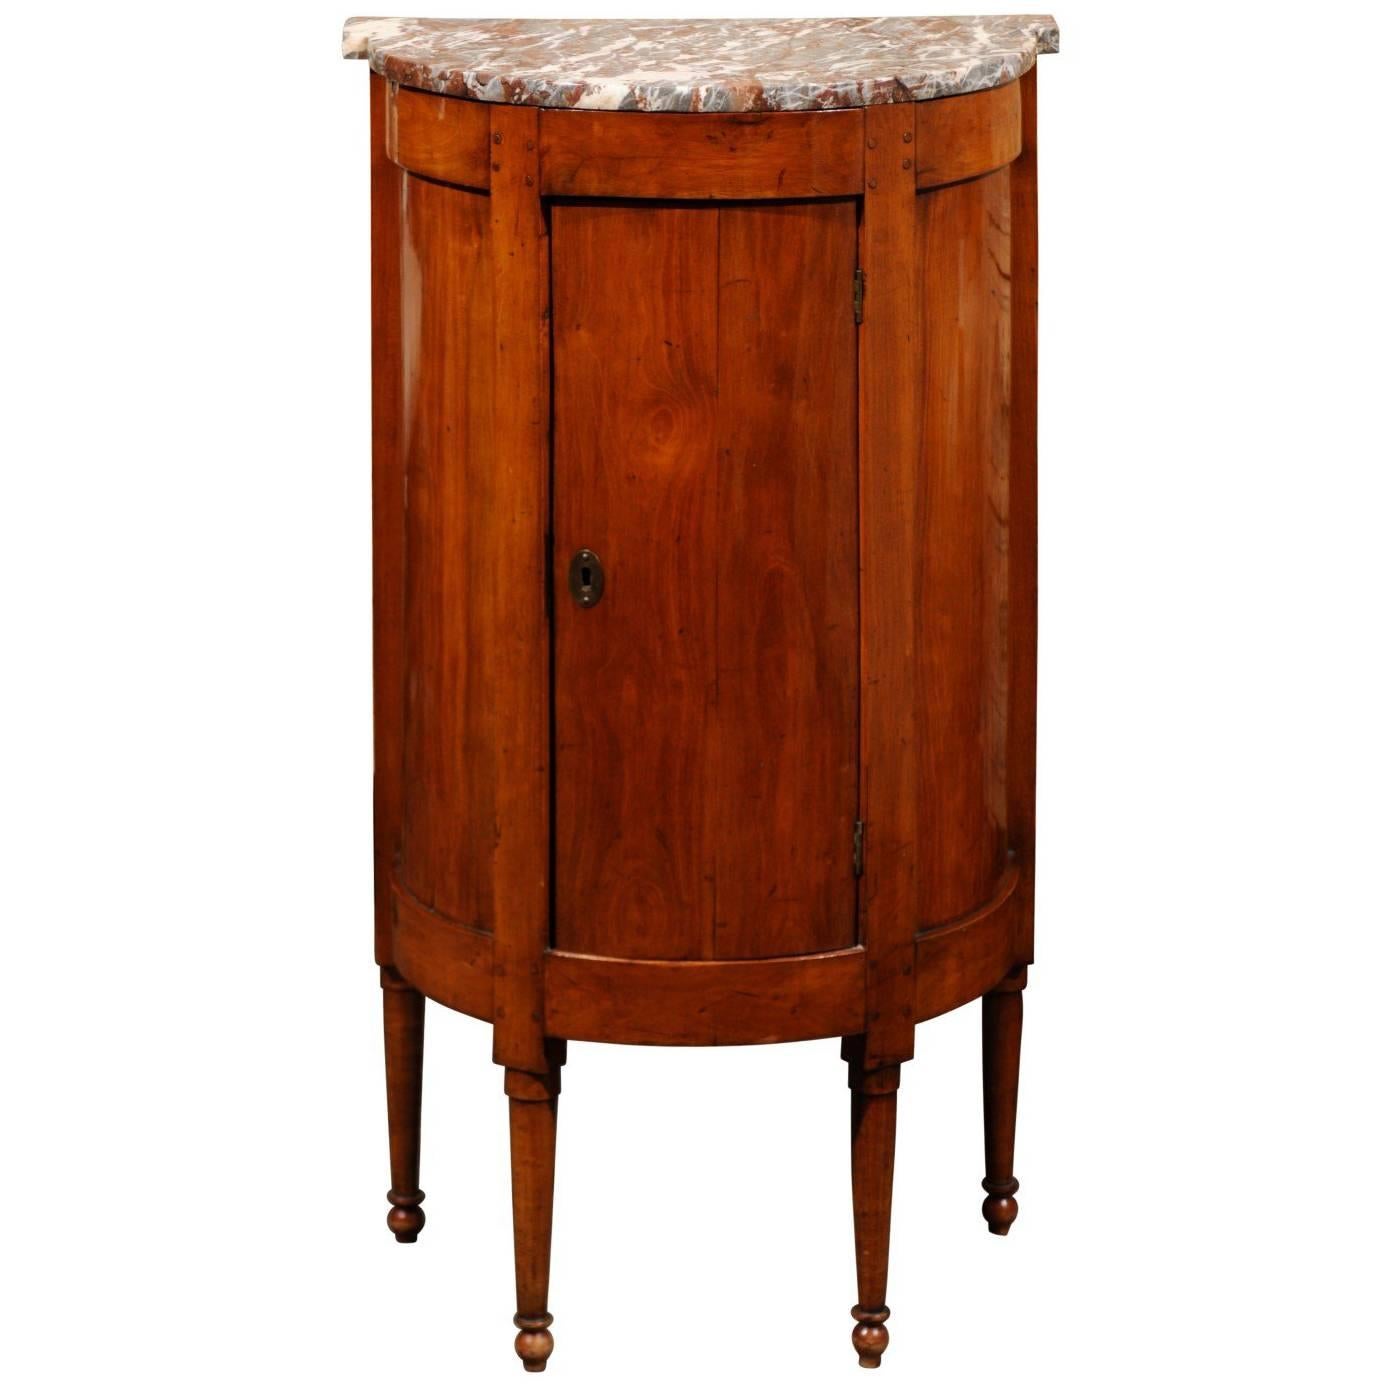 French Directoire Style Demilune Fruitwood Cabinet with Marble-Top, circa 1800